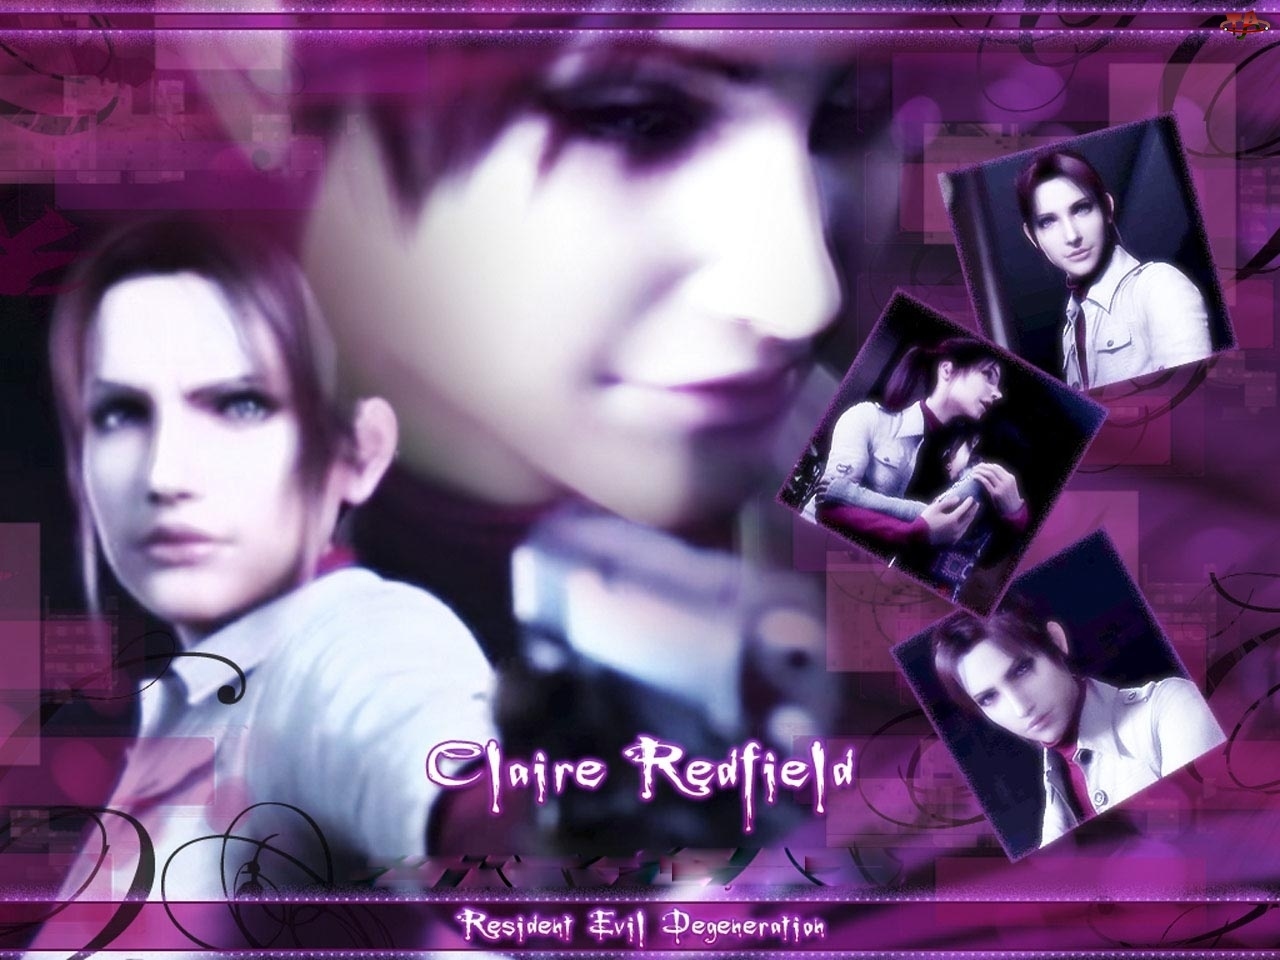 Resident Evil, Claire Redfield